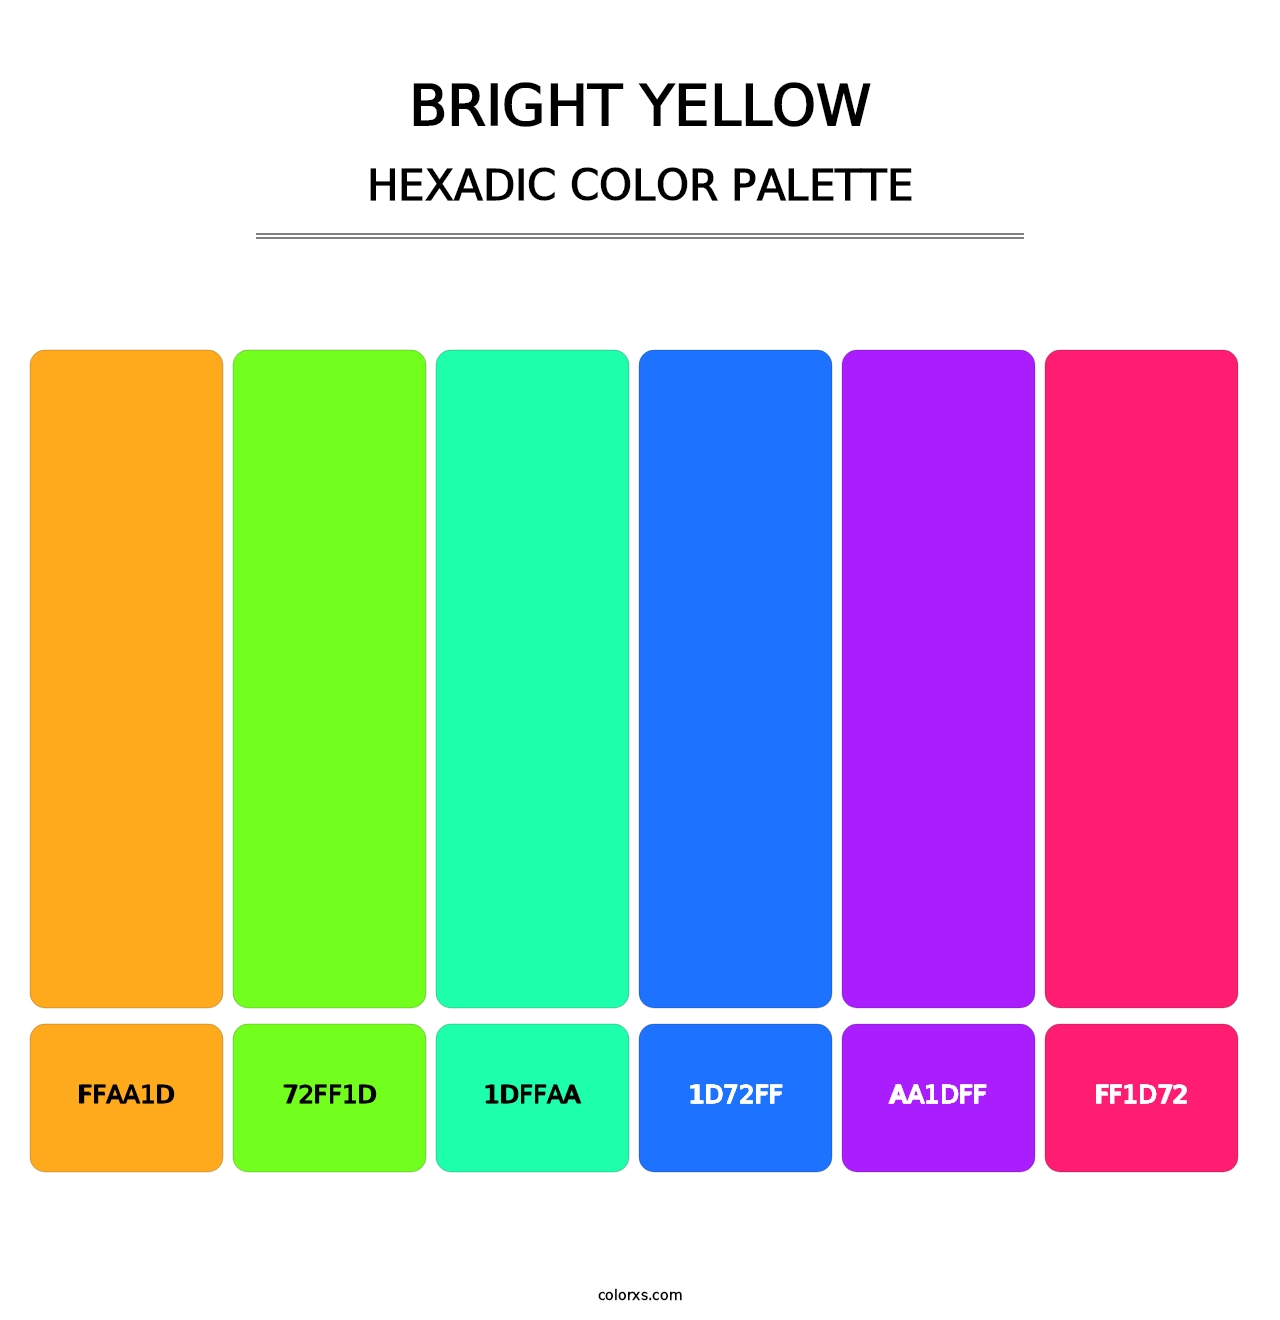 Bright Yellow - Hexadic Color Palette